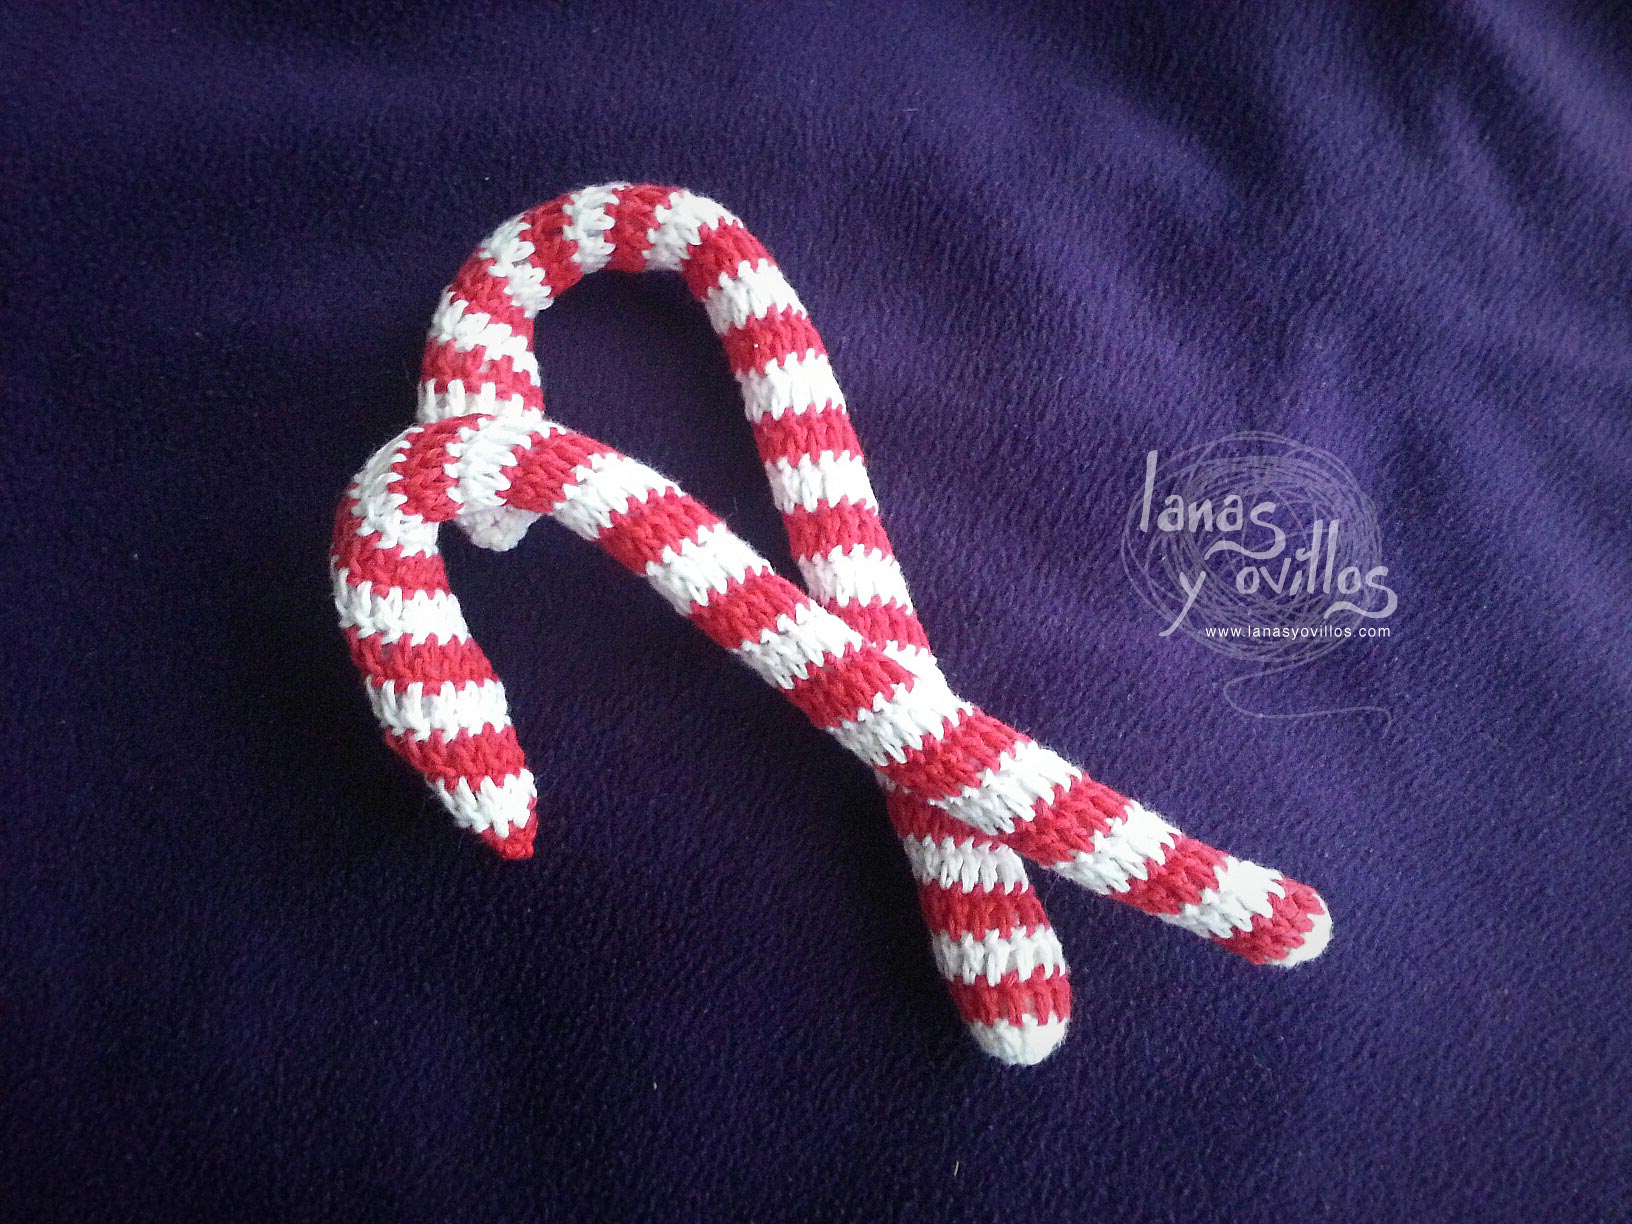 candy cane crochet amigurumi free pattern with video tutorial